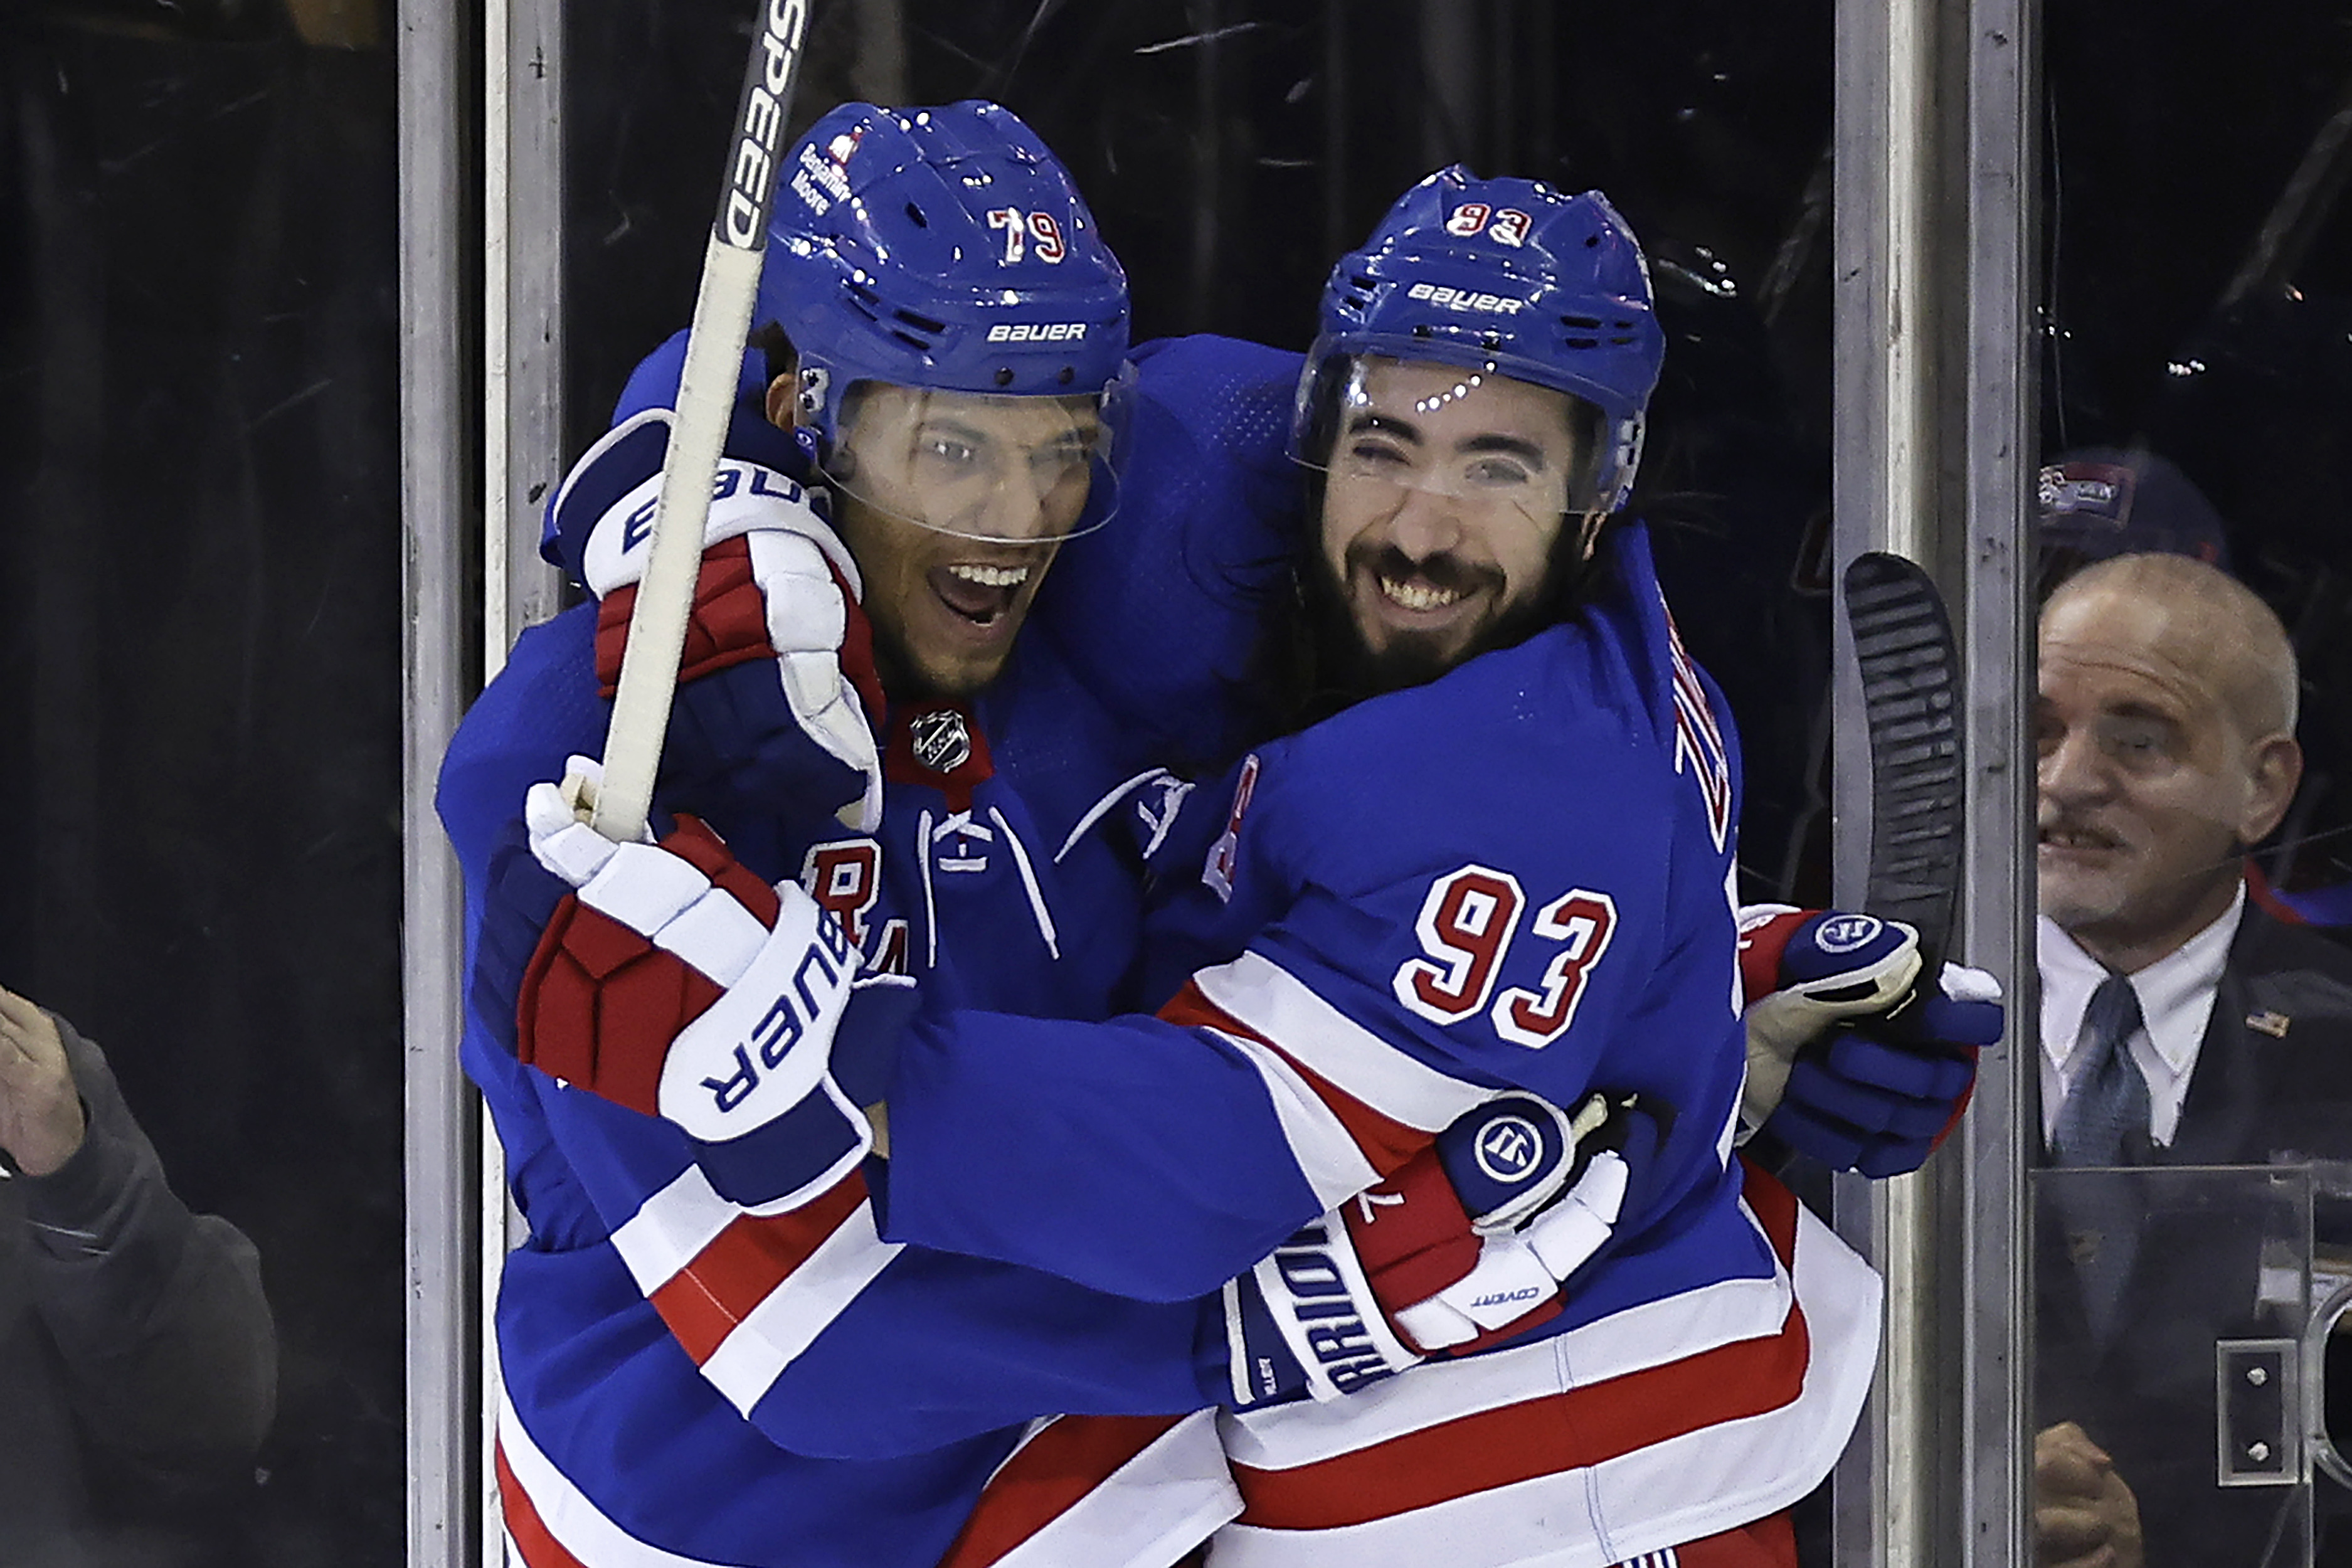 K'Andre Miller scores twice to lift Rangers over Capitals 5-1